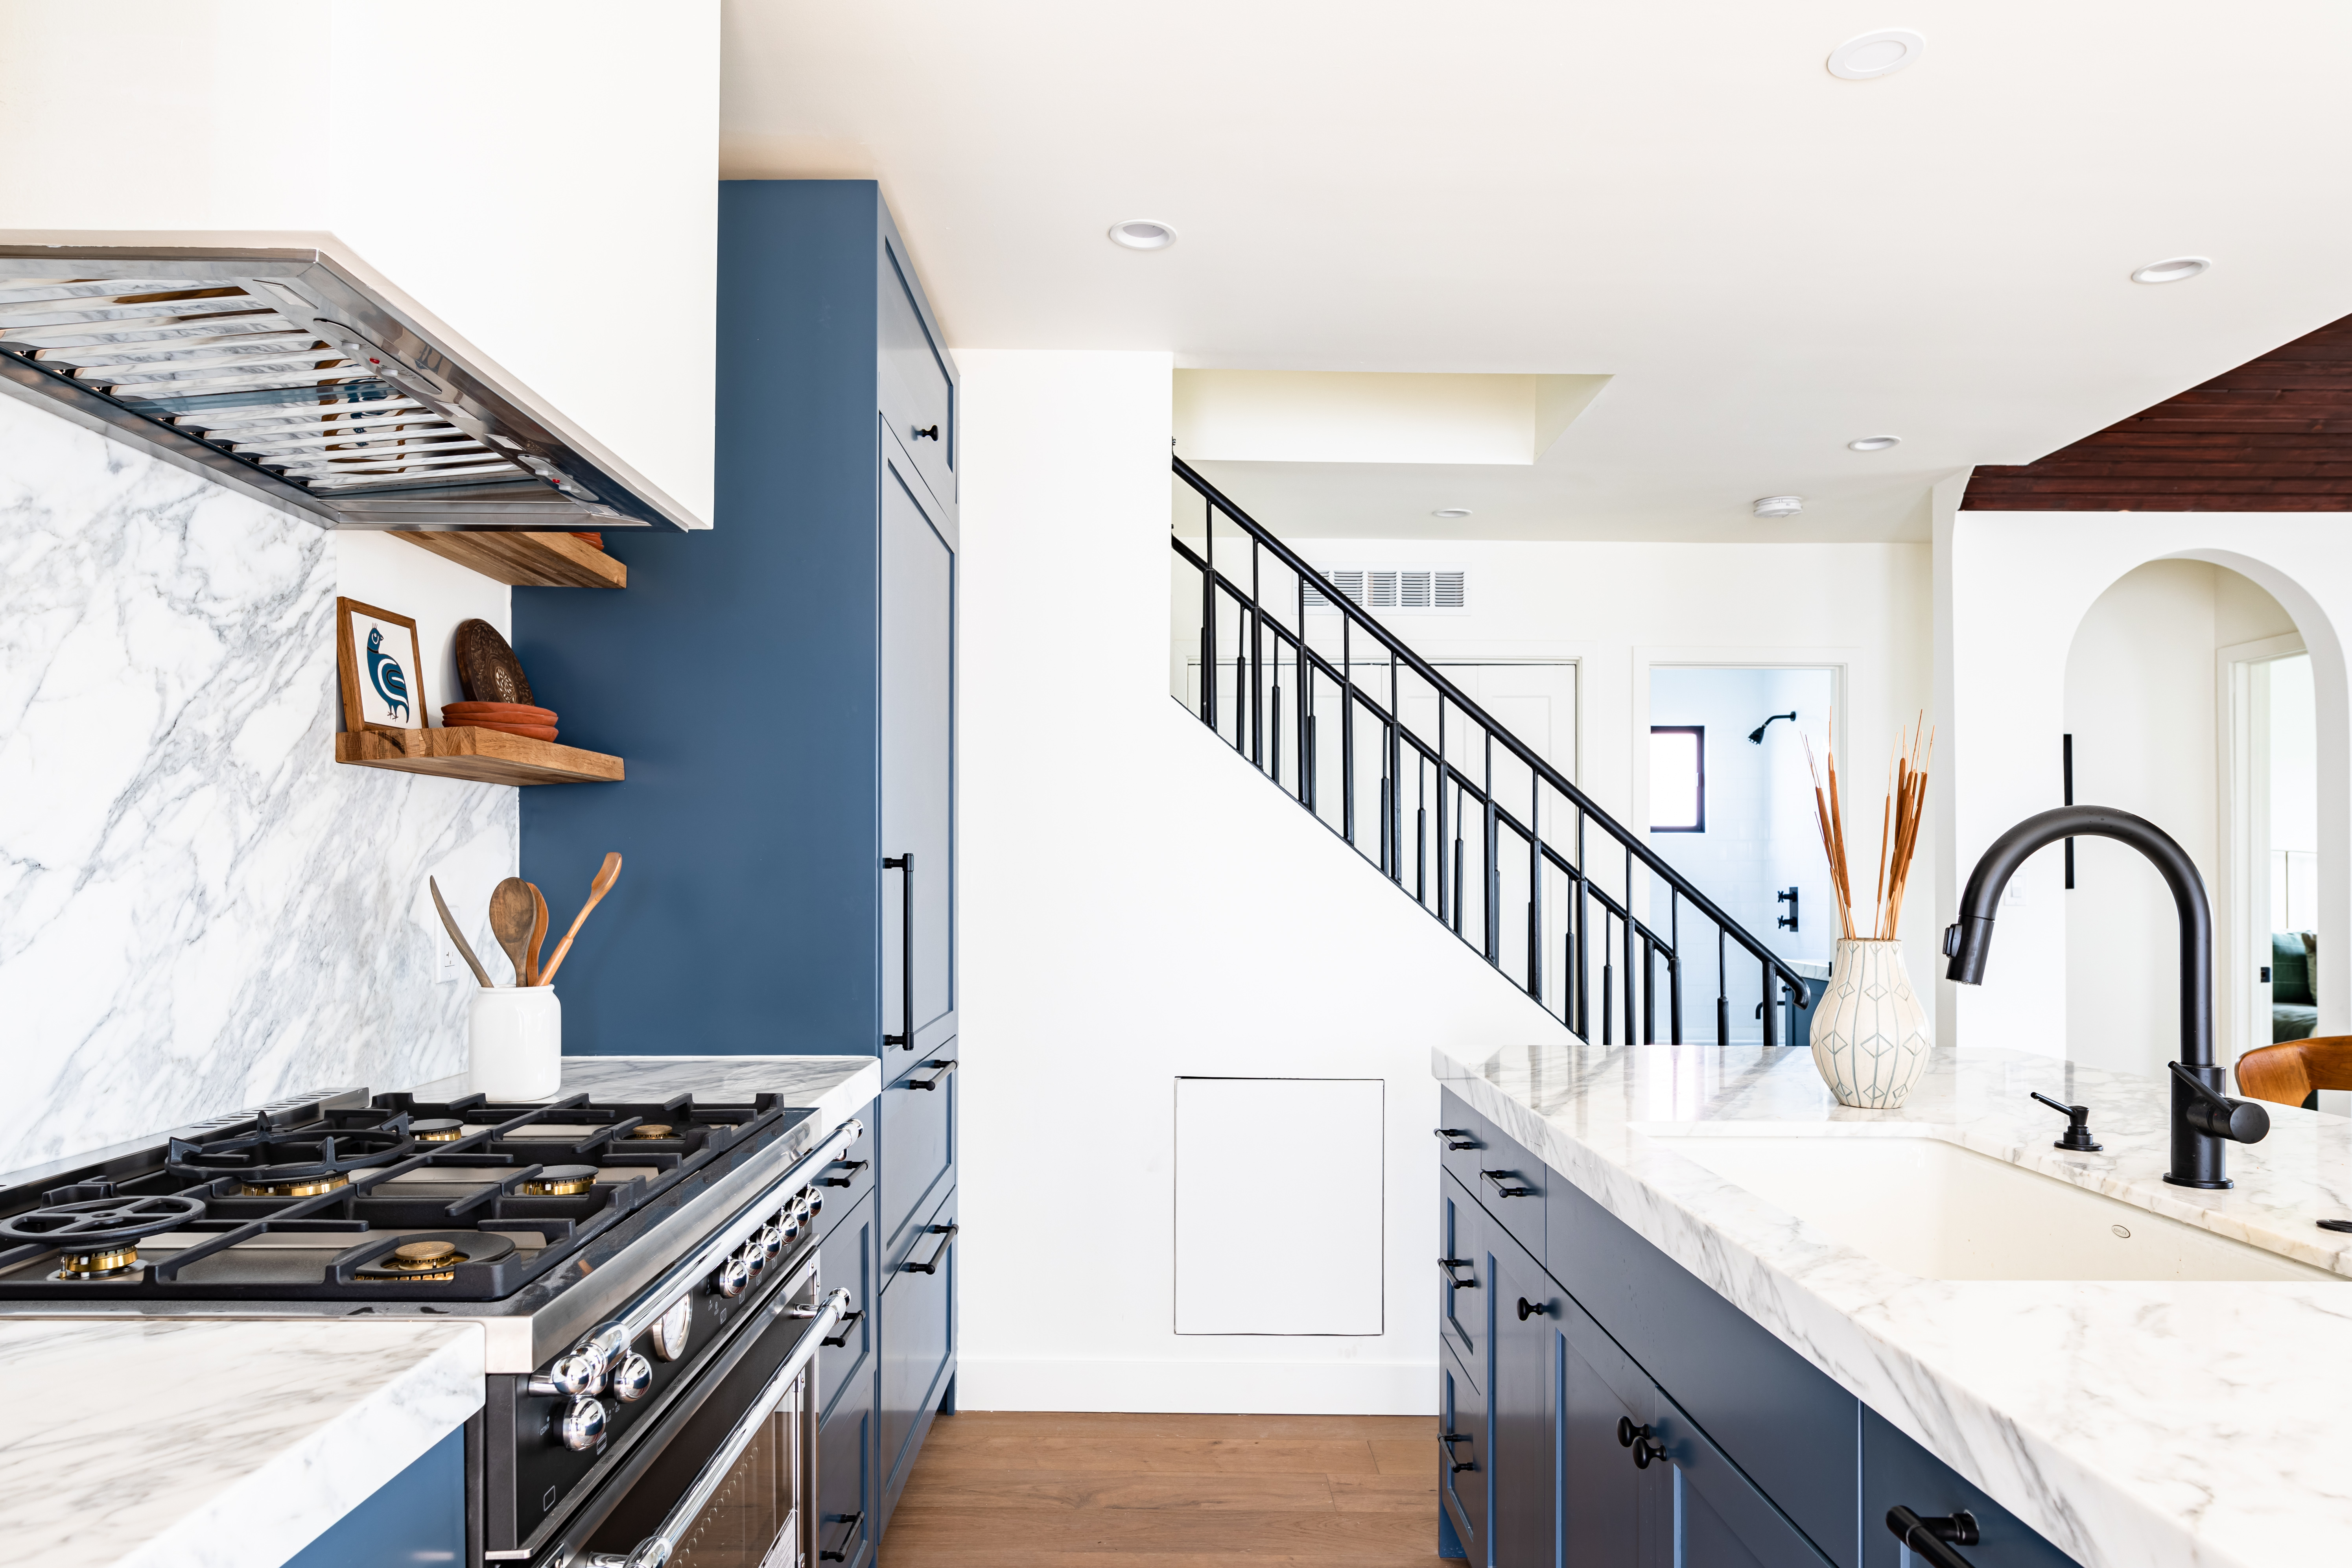 Building Code Requirements for Kitchens